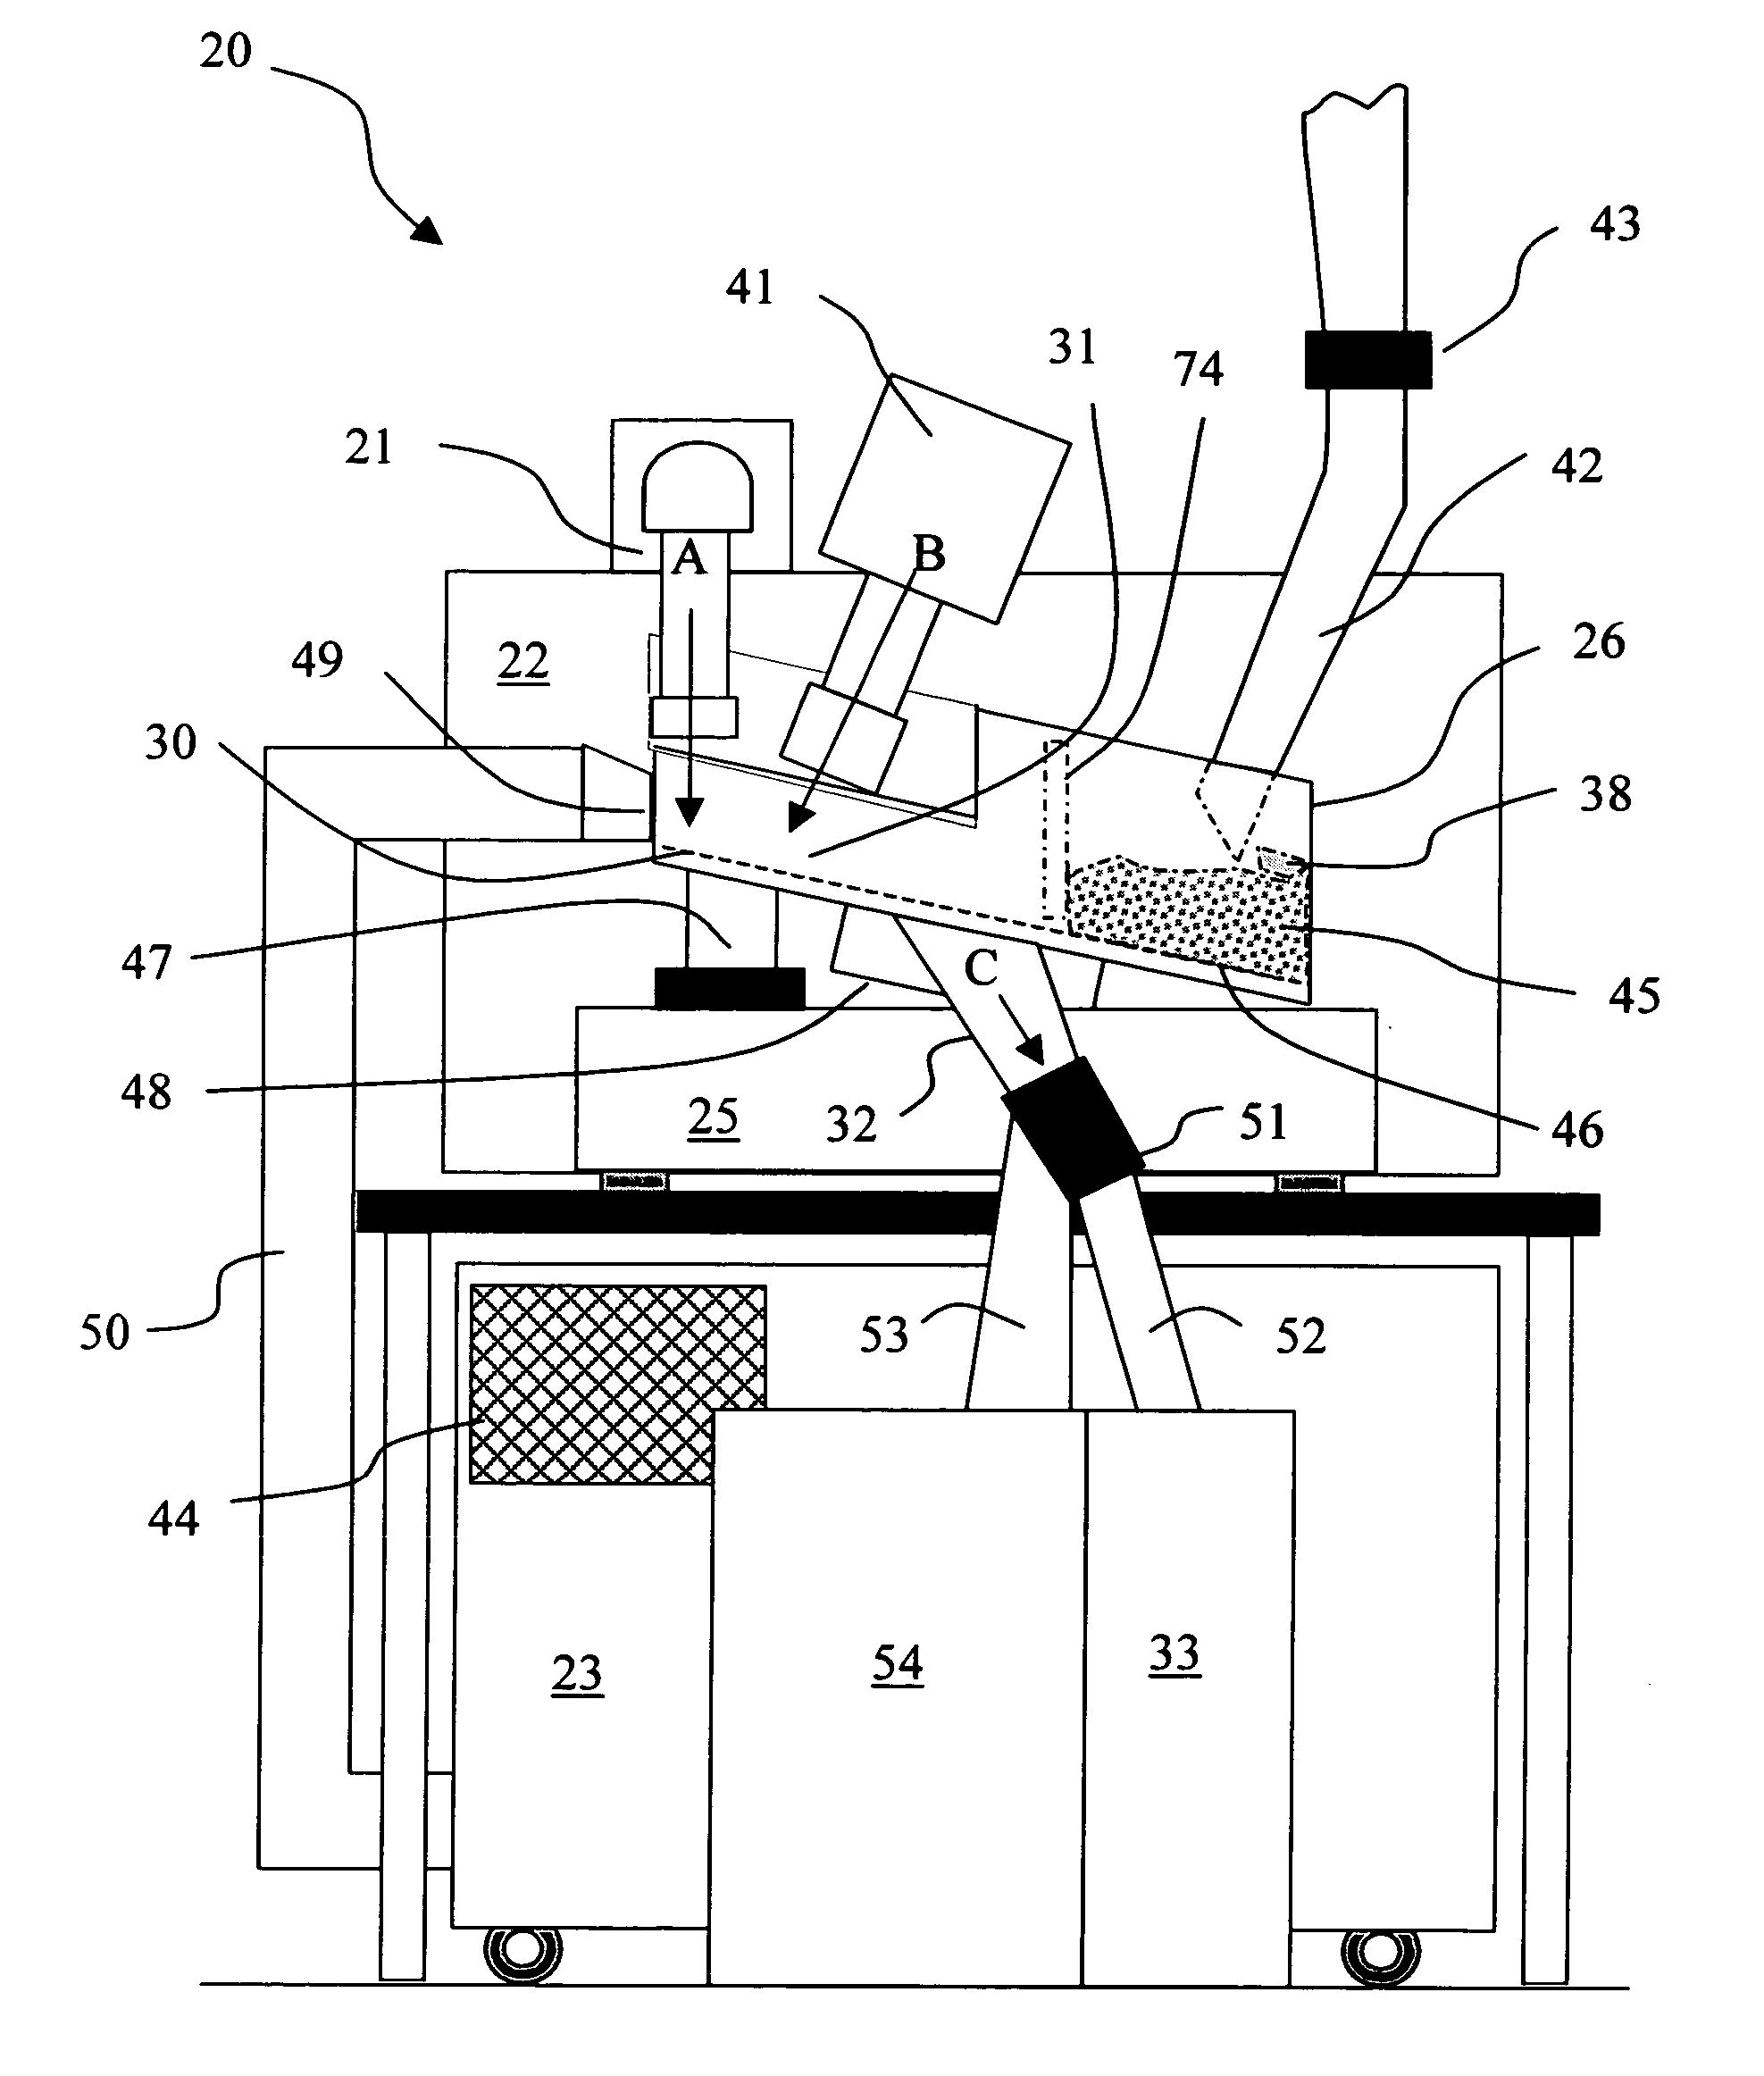 Laser drilling system and method